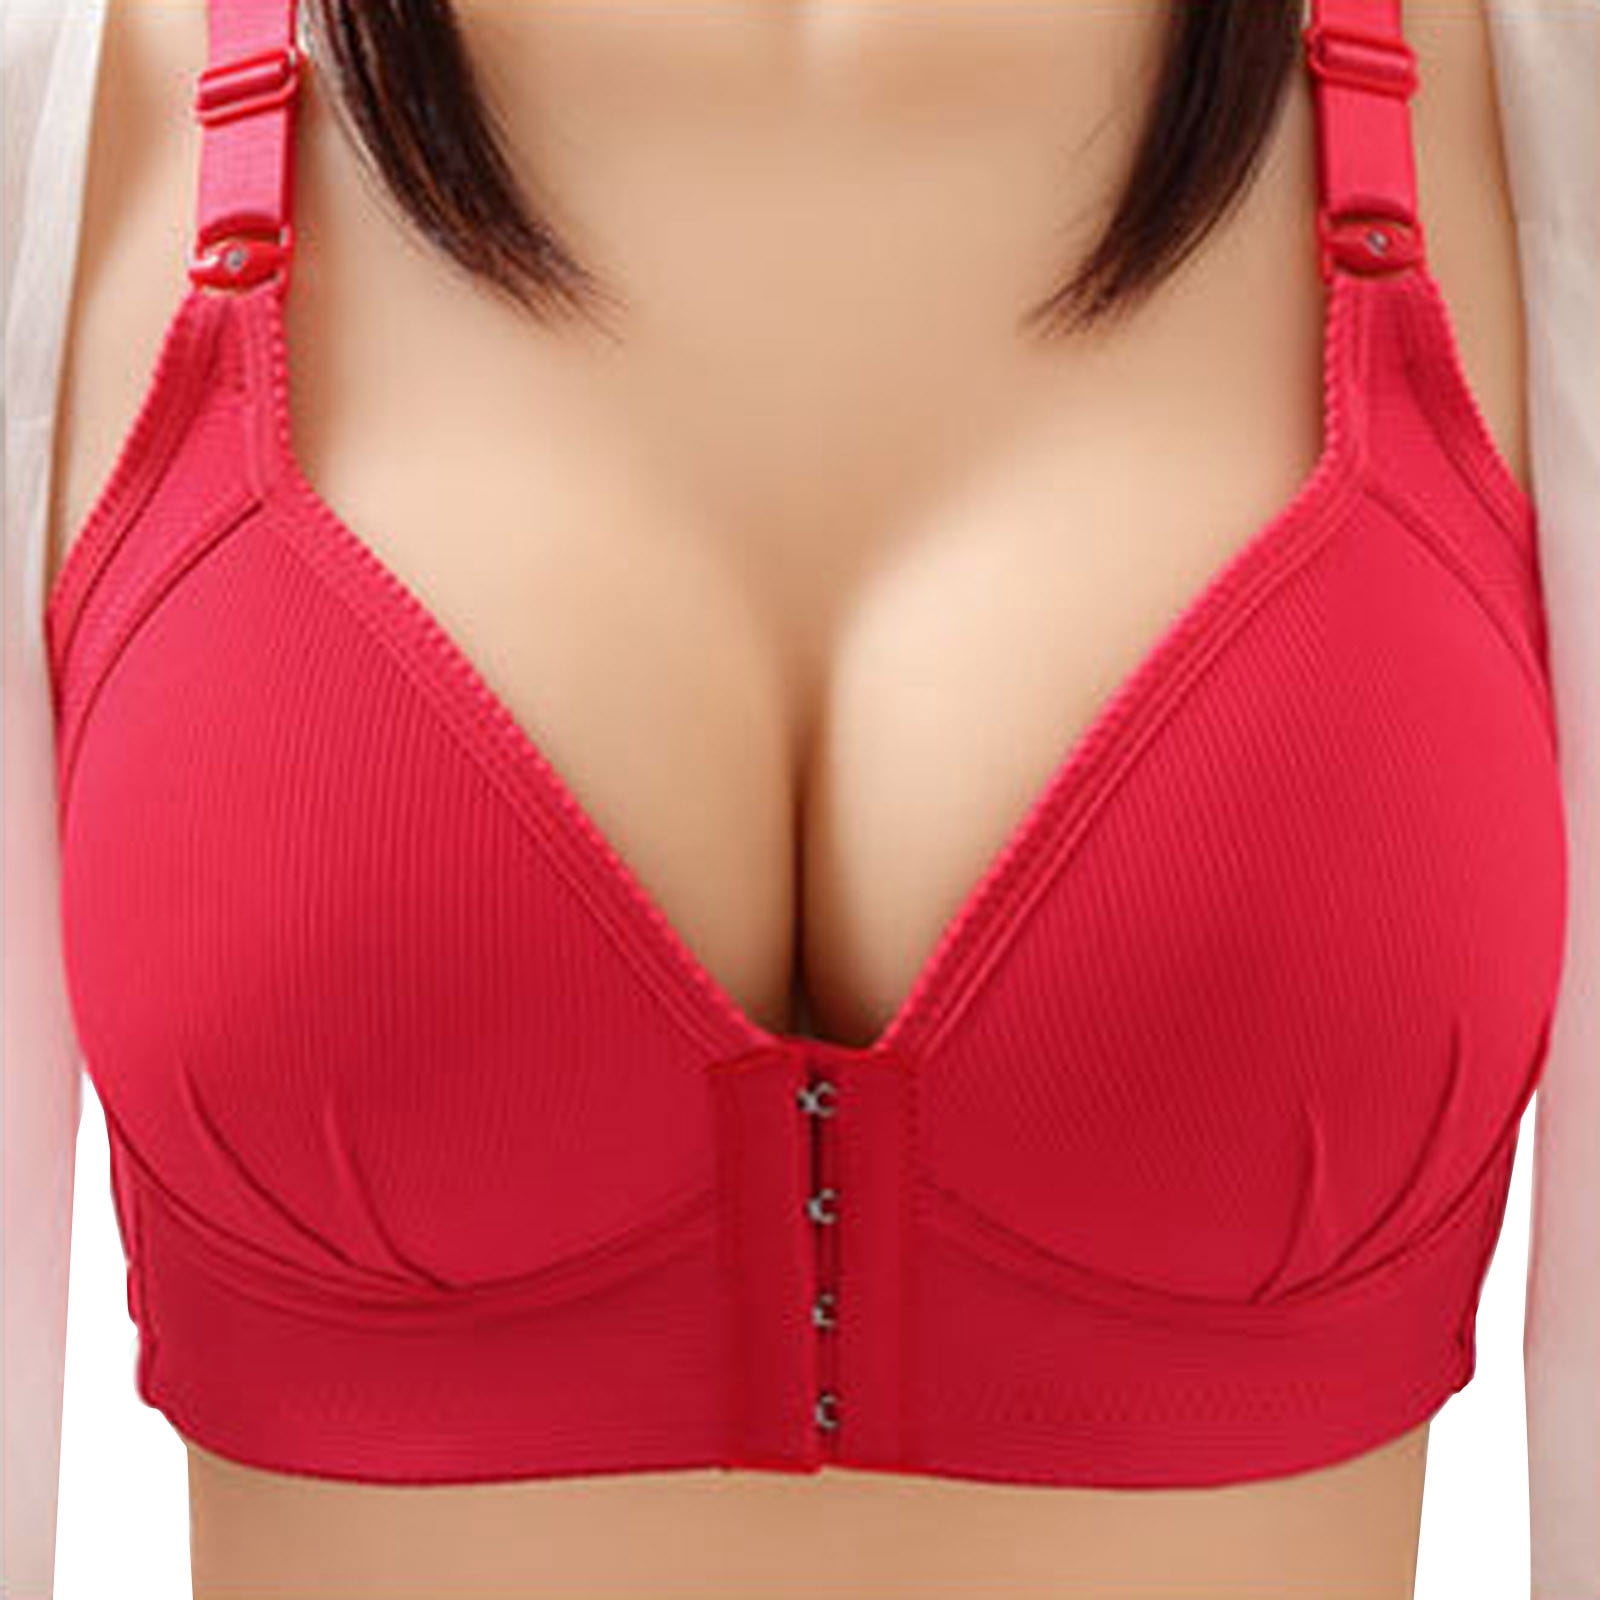 Bras for Women Halterneck Backless Fitness Bustier Padded Out